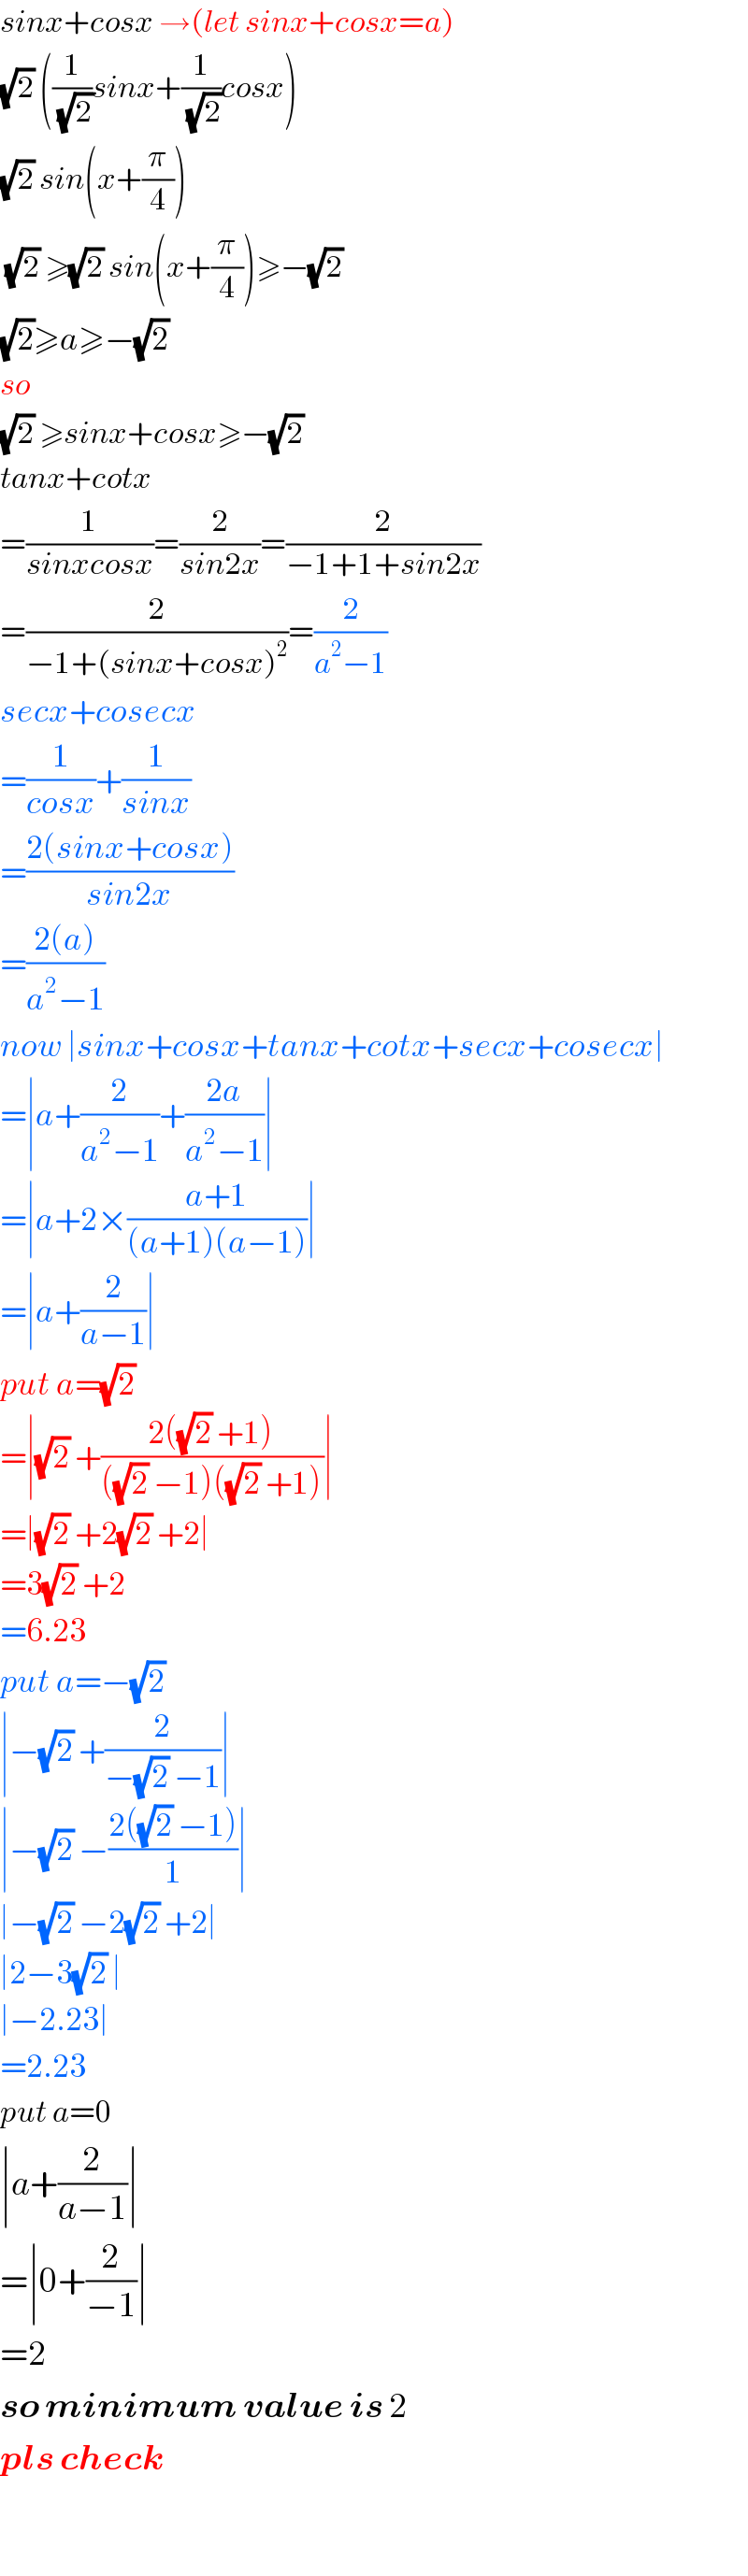 sinx+cosx →(let sinx+cosx=a)  (√2) ((1/(√2))sinx+(1/(√2))cosx)  (√2) sin(x+(π/4))   (√2) ≥(√2) sin(x+(π/4))≥−(√2)   (√2)≥a≥−(√2)  so   (√2) ≥sinx+cosx≥−(√2)   tanx+cotx  =(1/(sinxcosx))=(2/(sin2x))=(2/(−1+1+sin2x))  =(2/(−1+(sinx+cosx)^2 ))=(2/(a^2 −1))  secx+cosecx  =(1/(cosx))+(1/(sinx))  =((2(sinx+cosx))/(sin2x))  =((2(a))/(a^2 −1))  now ∣sinx+cosx+tanx+cotx+secx+cosecx∣  =∣a+(2/(a^2 −1))+((2a)/(a^2 −1))∣  =∣a+2×((a+1)/((a+1)(a−1)))∣  =∣a+(2/(a−1))∣  put a=(√2)   =∣(√2) +((2((√2) +1))/(((√2) −1)((√2) +1)))∣  =∣(√2) +2(√2) +2∣  =3(√2) +2  =6.23  put a=−(√2)   ∣−(√2) +(2/(−(√2) −1))∣  ∣−(√2) −((2((√2) −1))/1)∣  ∣−(√2) −2(√2) +2∣  ∣2−3(√2) ∣  ∣−2.23∣  =2.23  put a=0  ∣a+(2/(a−1))∣  =∣0+(2/(−1))∣  =2  so minimum value is 2  pls check    